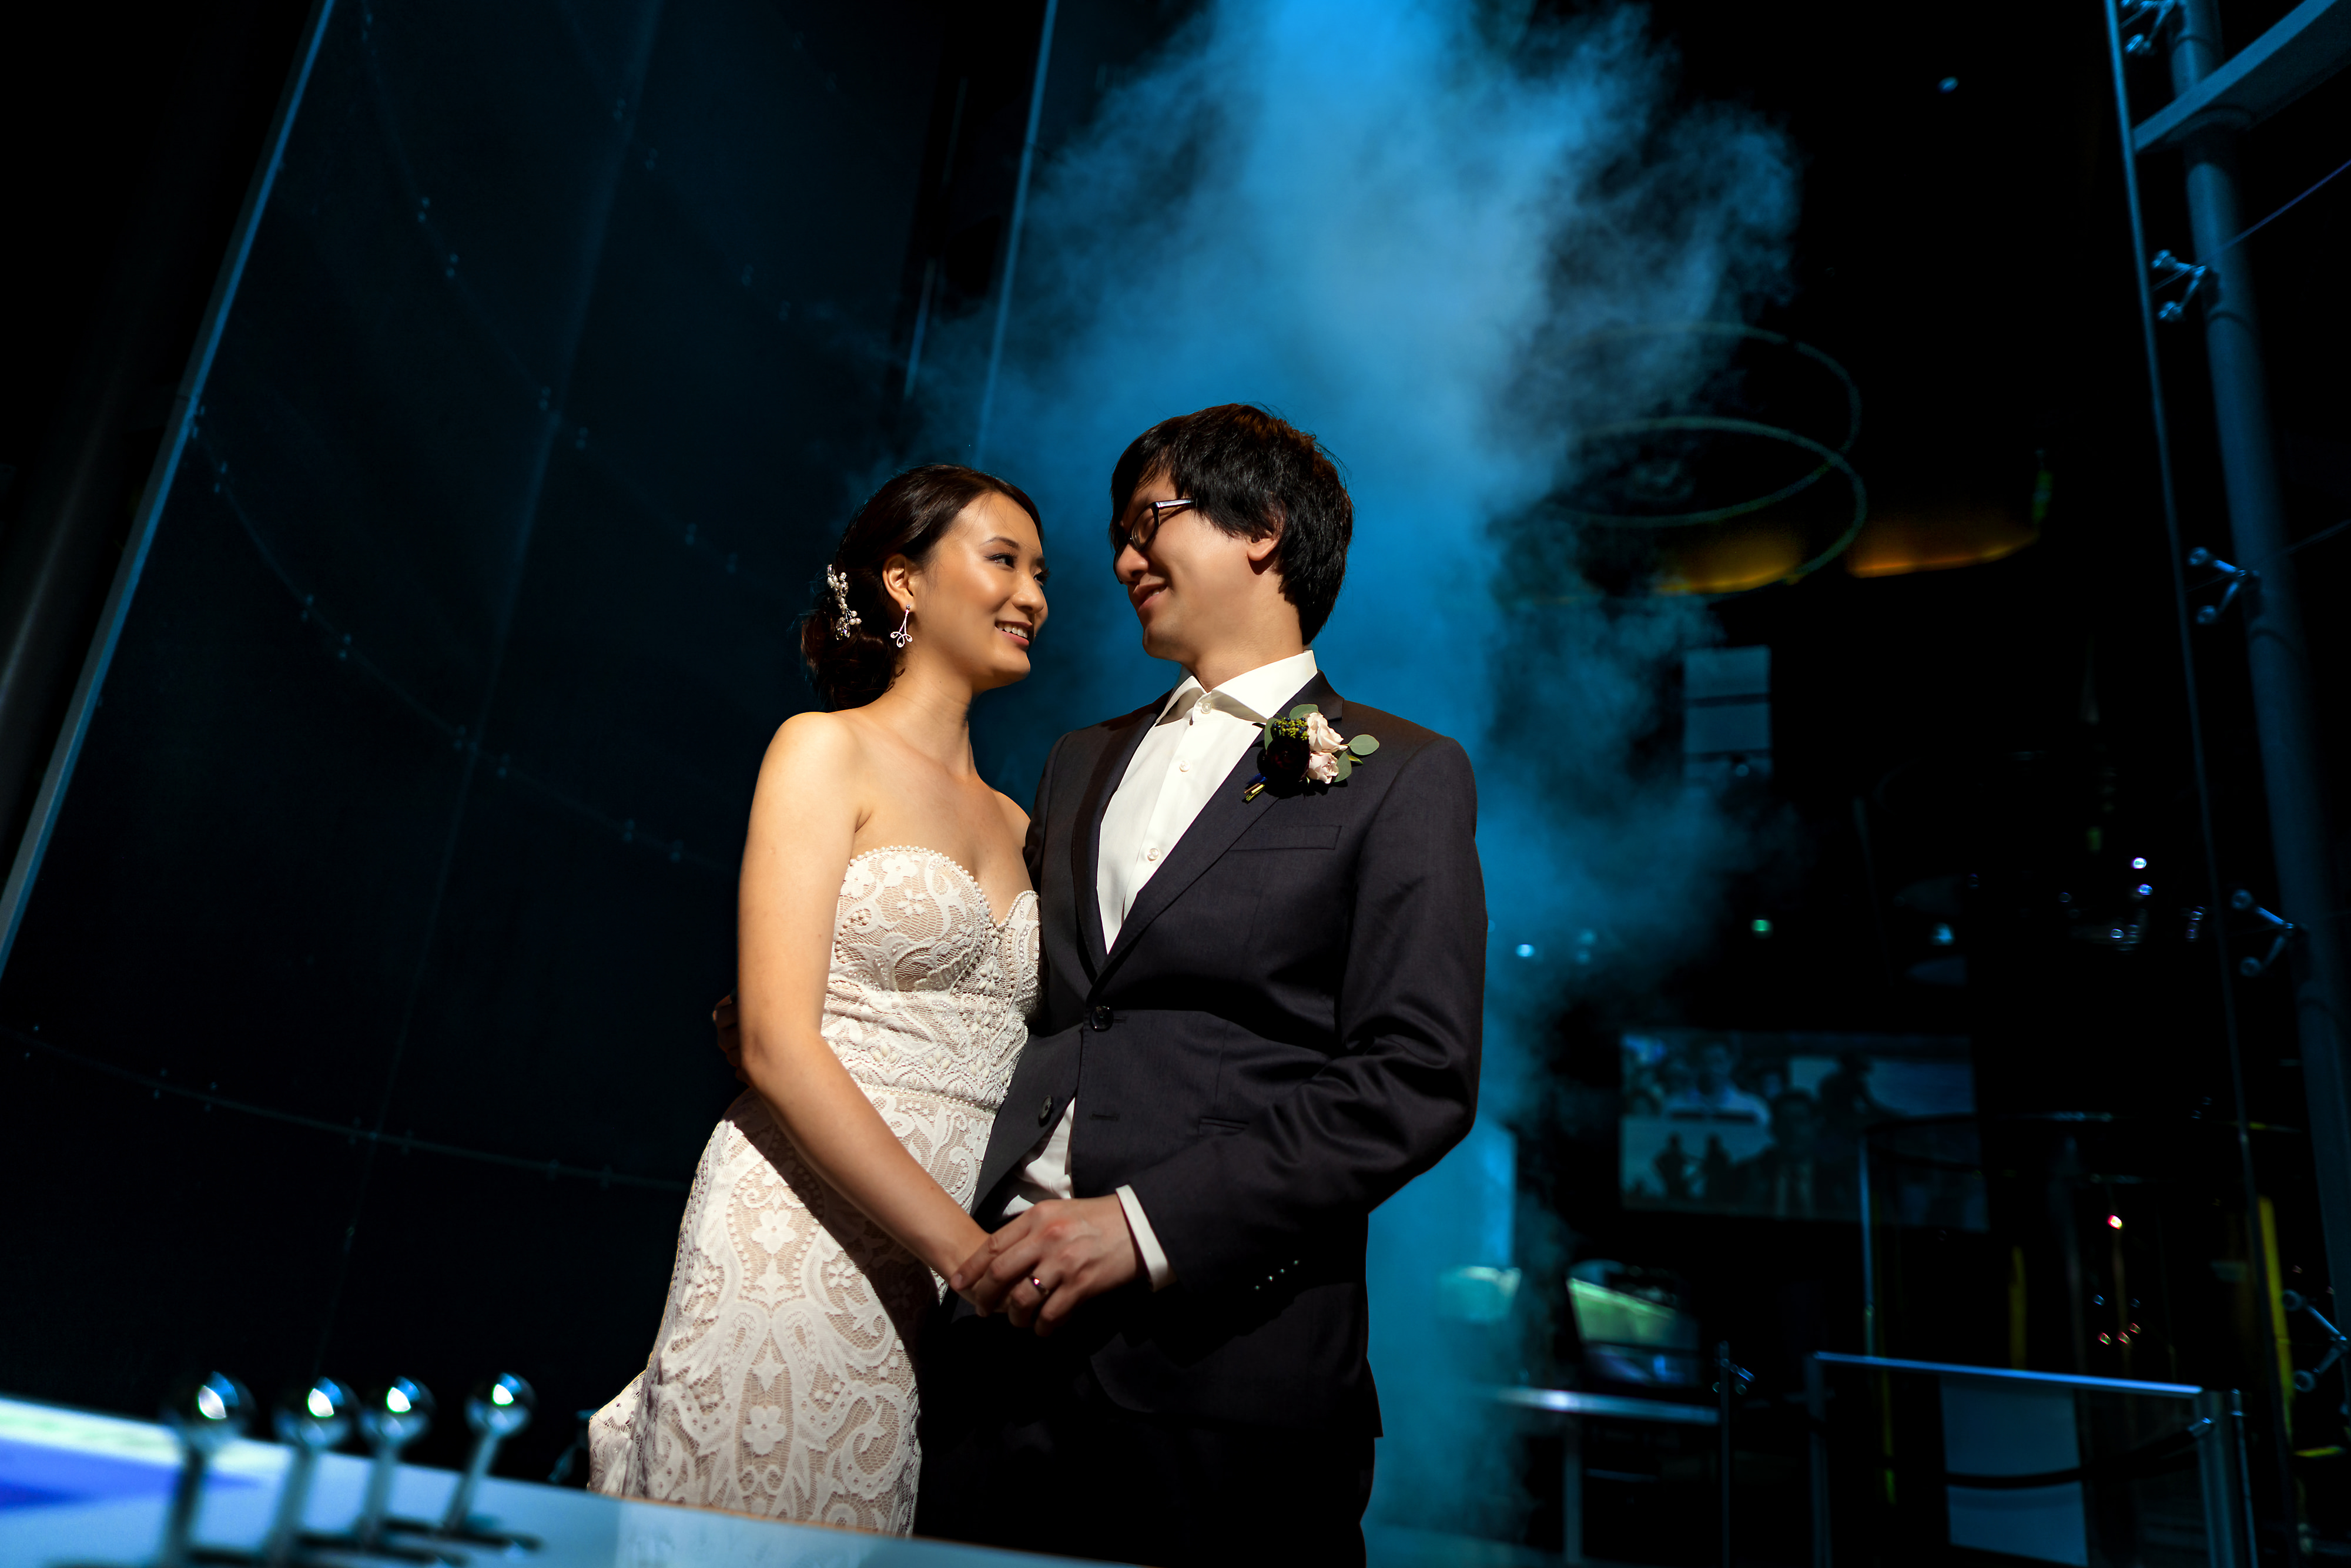 Bride and groom pose for portrait in front of the Tornado vortex exhibit during wedding reception at the Museum of Science and Industry in Chicago